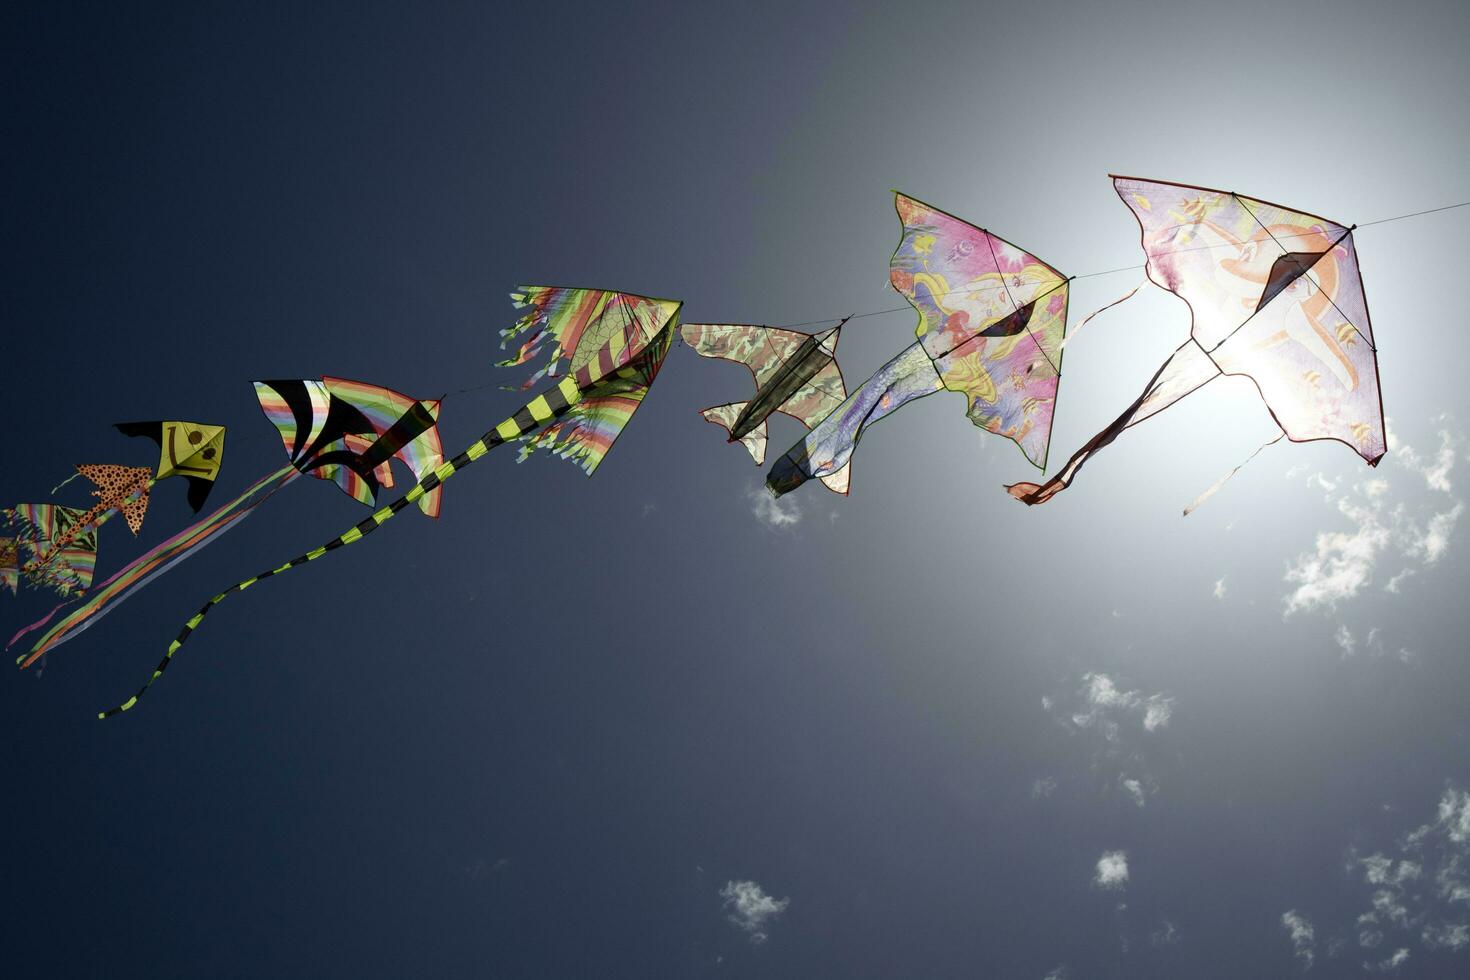 Series of colorful kites flying in the blue sky photo